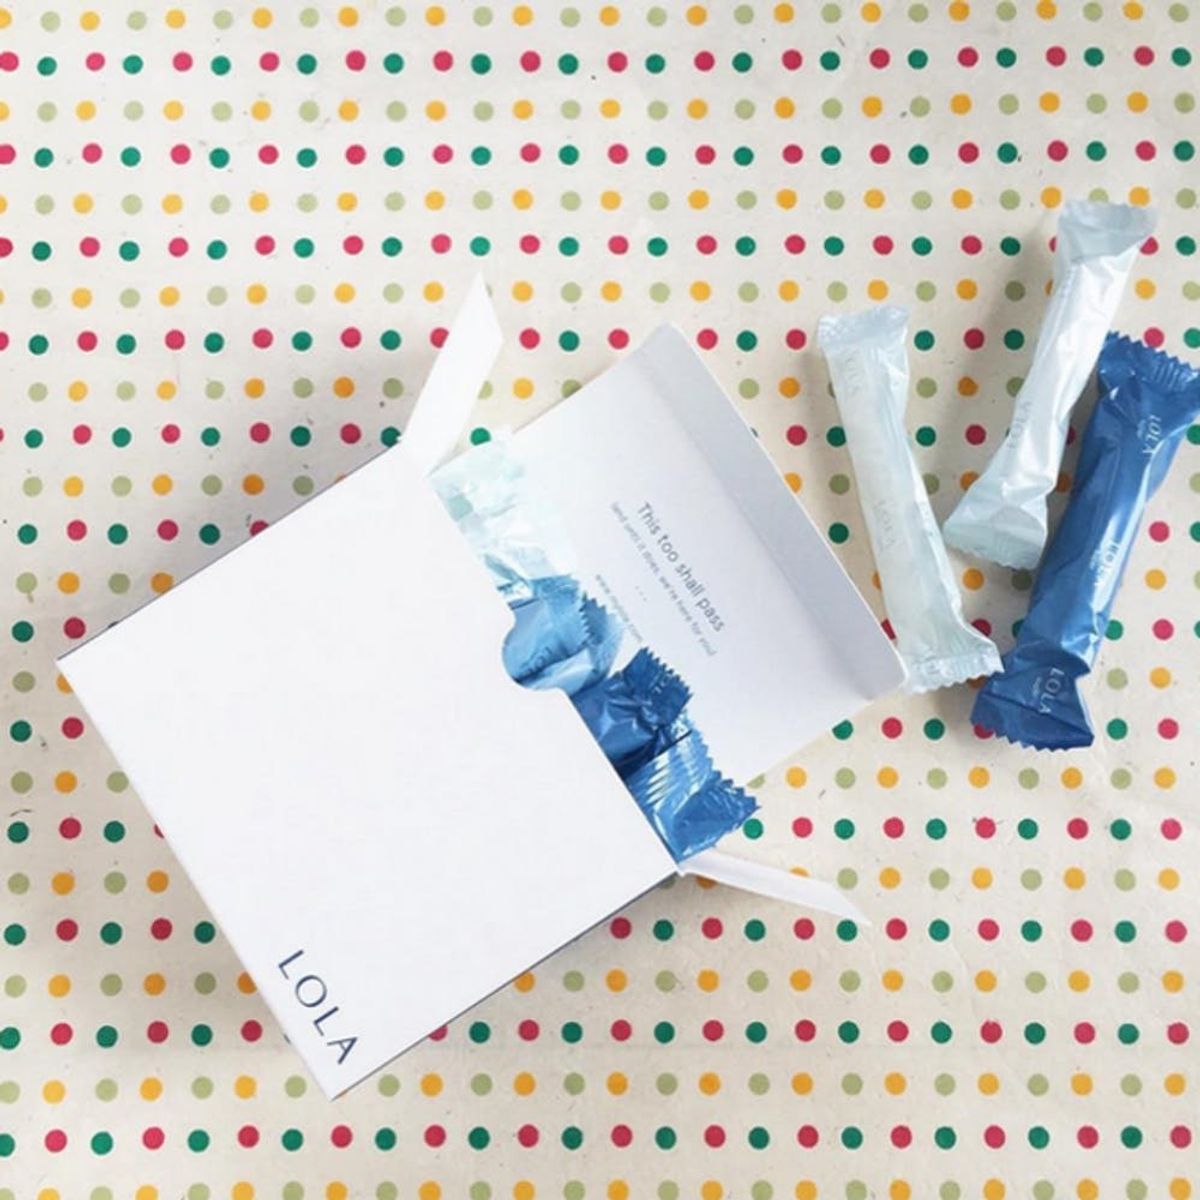 This Tampon Company Wants to Make Your Period Better